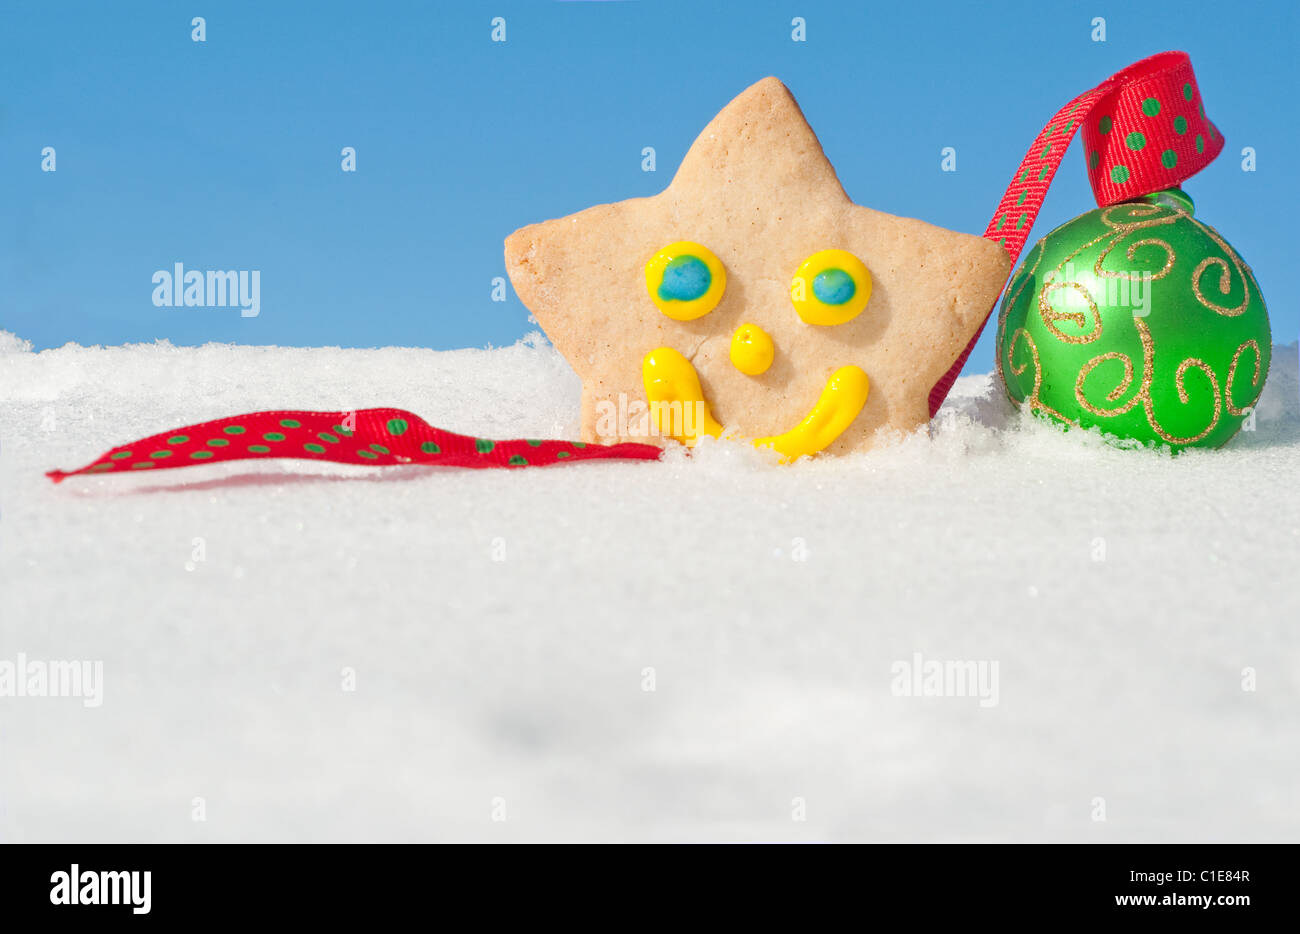 A delightful Christmas cookie on snow with a green Christmas bauble, with copy space Stock Photo